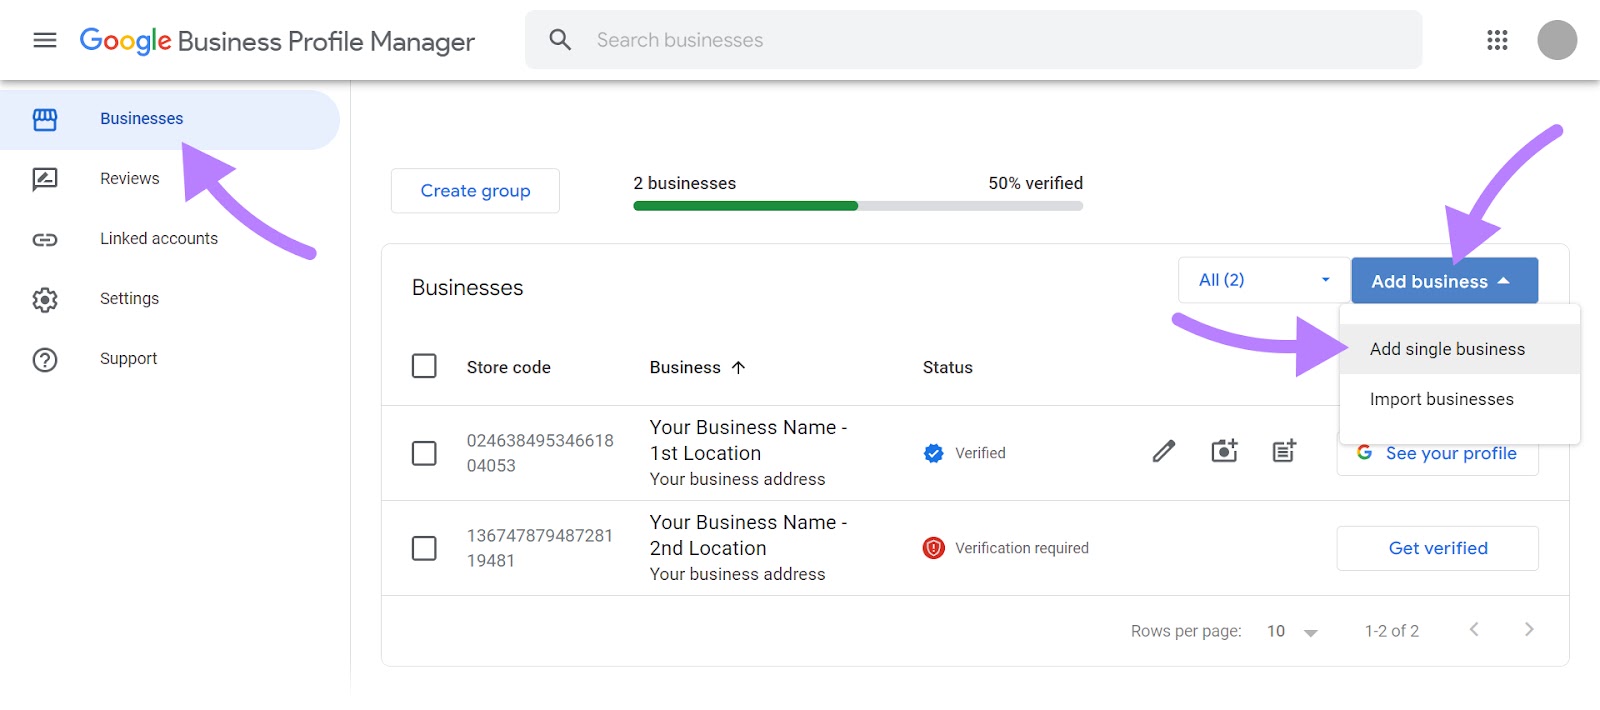 “Add azygous  business” selected successful  the “Businesses” tab of Google Business Profile Manager